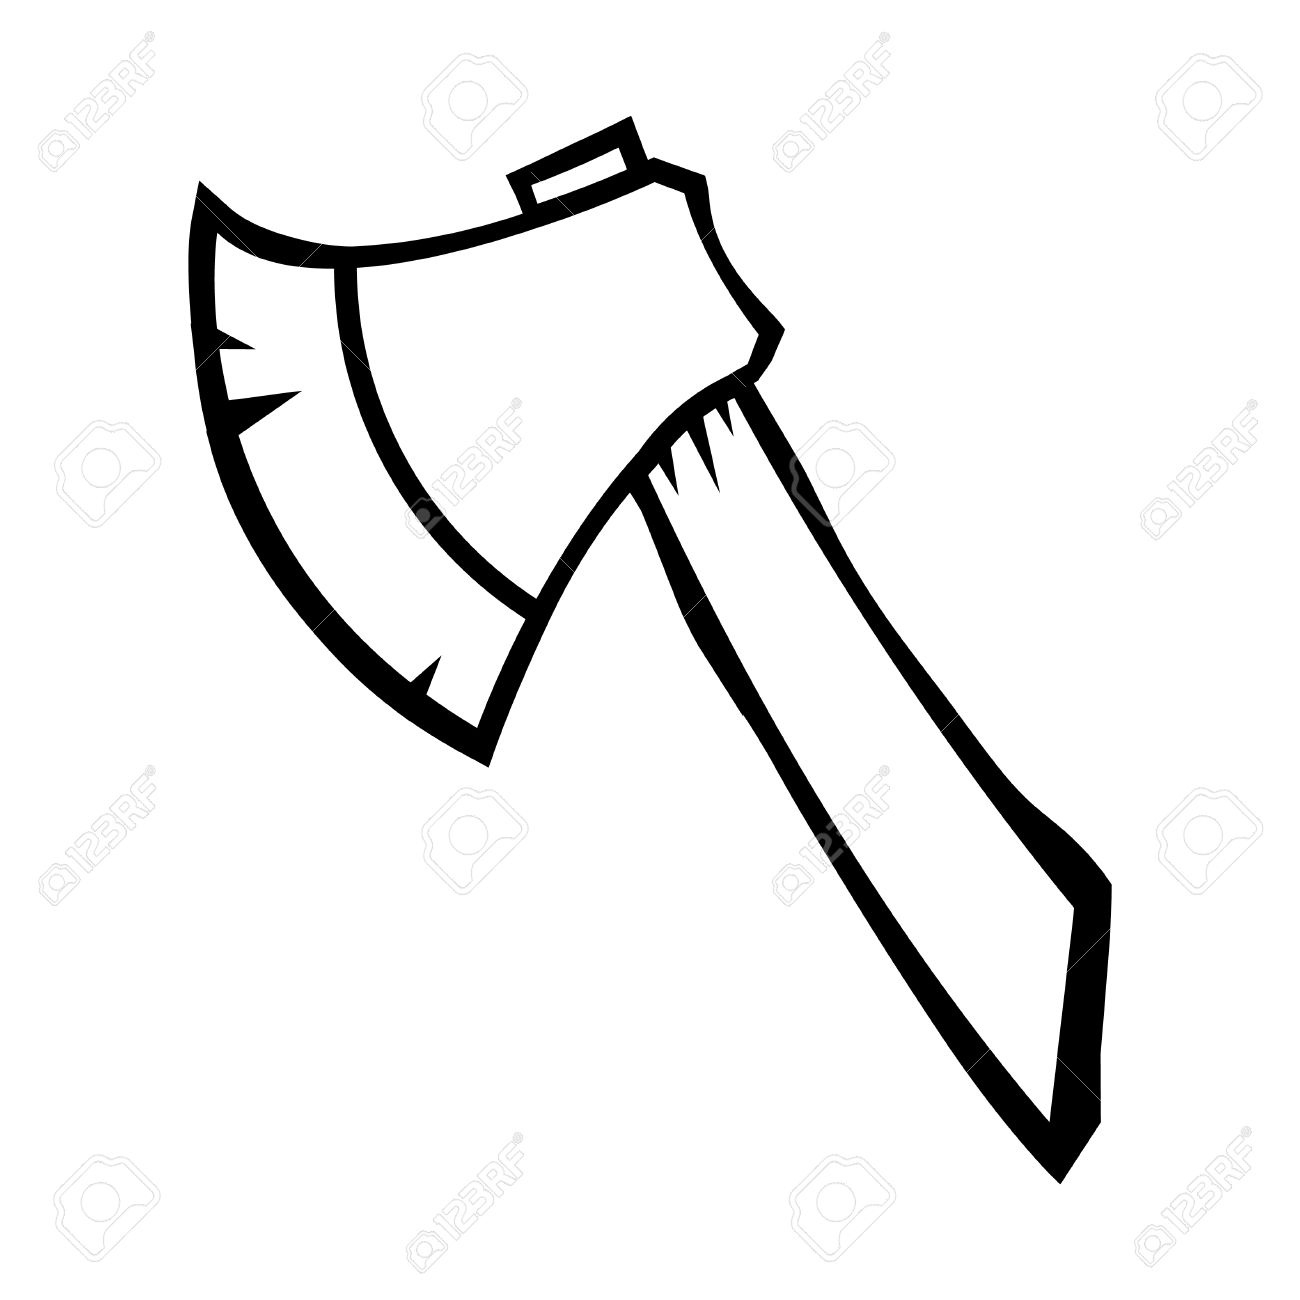 Axe clipart black and white. Ax station with 